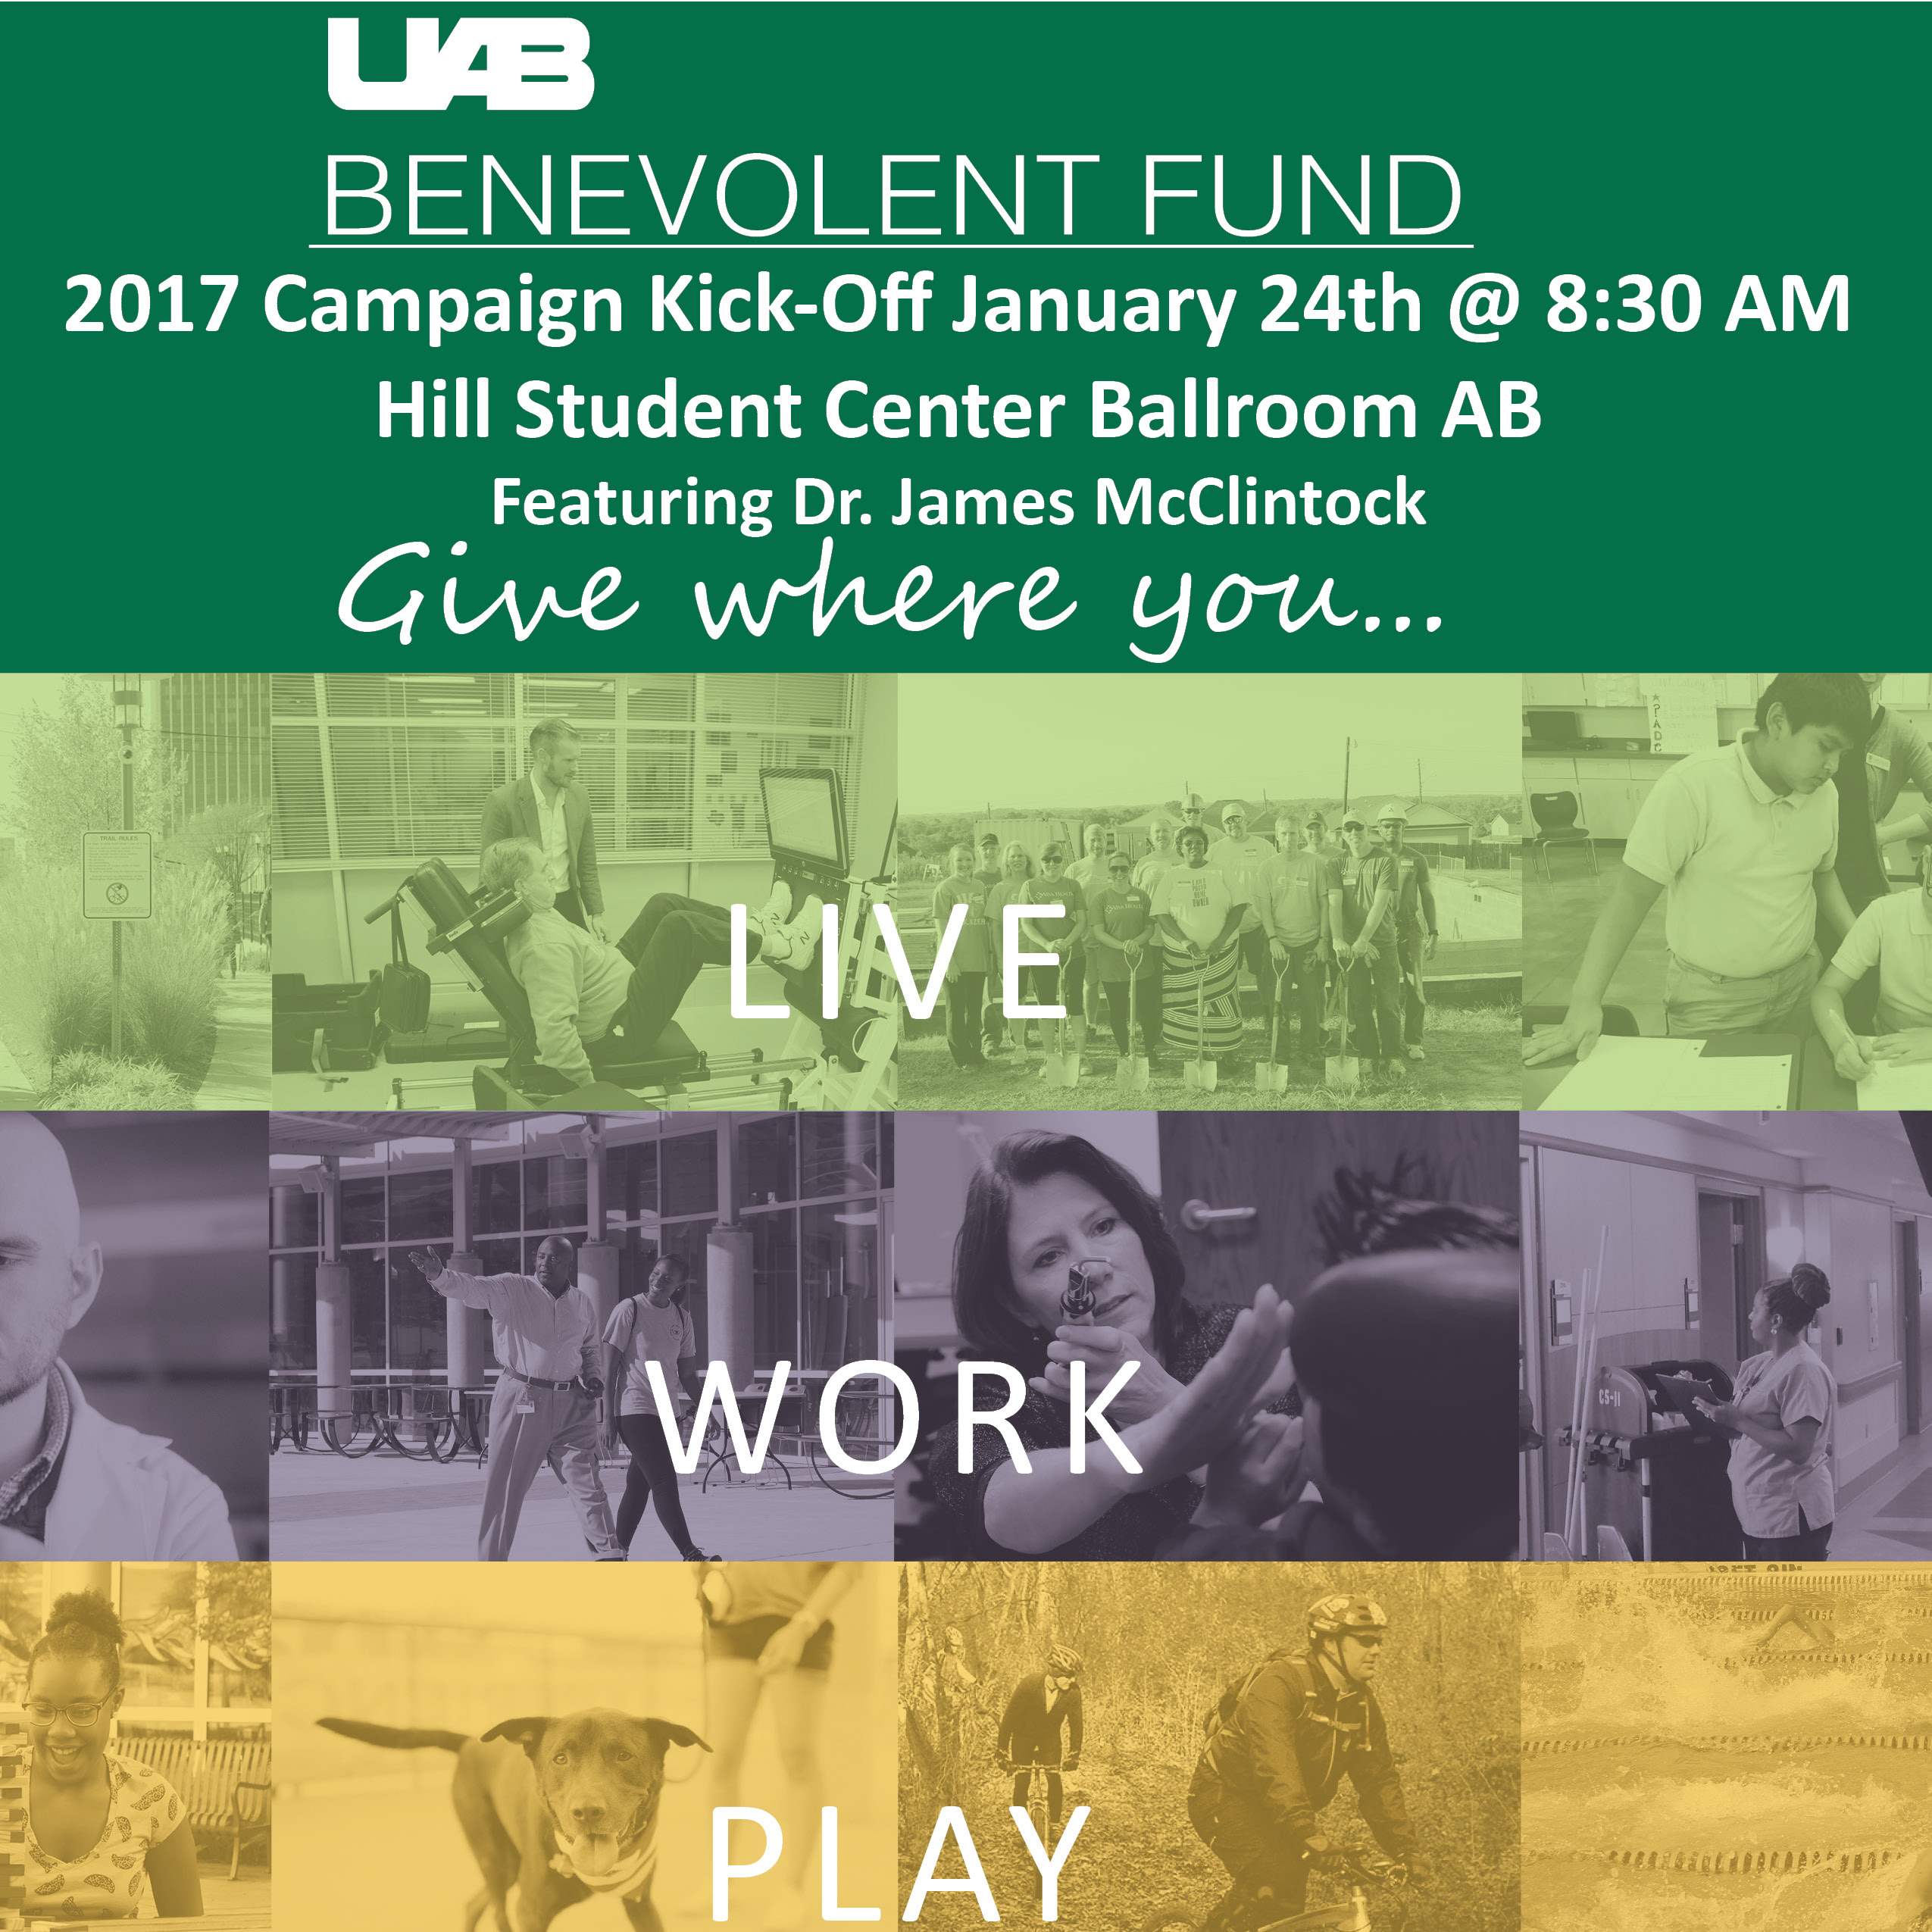 UAB IT helps support Benevolent Fund in reaching goals